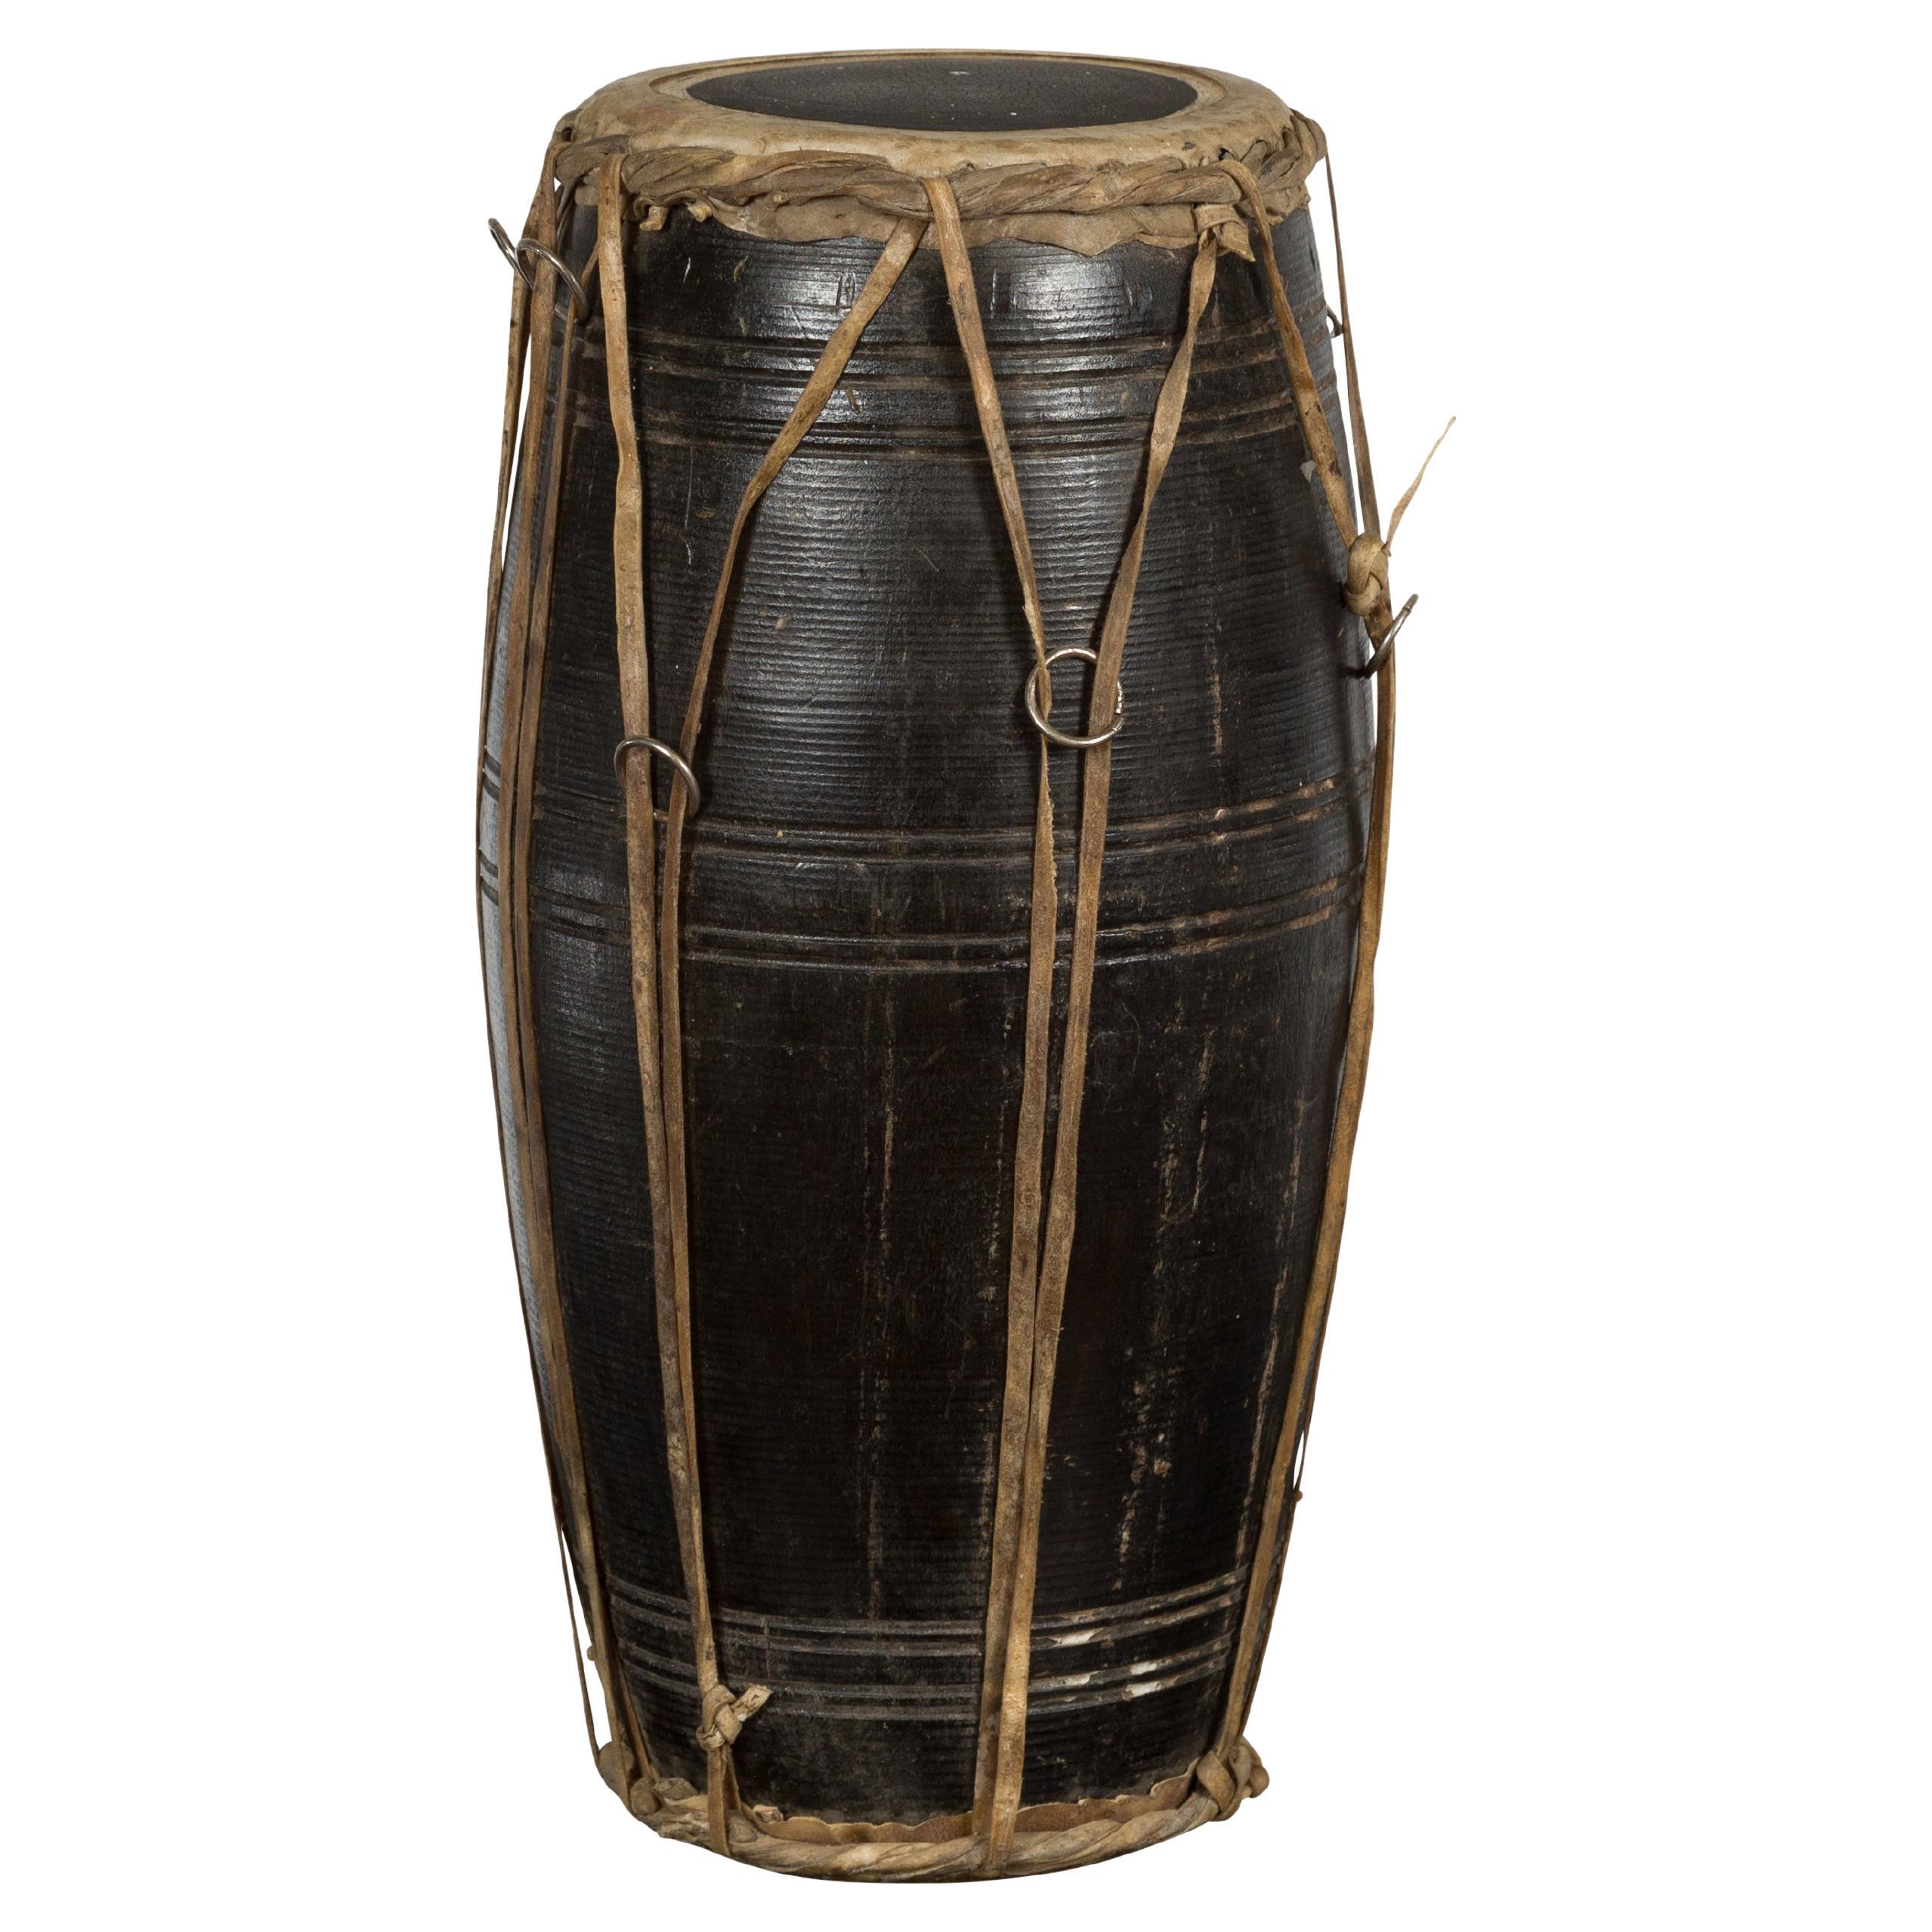 Thai Wood and Leather Klong Khaek Processional Drum with Distressed Appearance